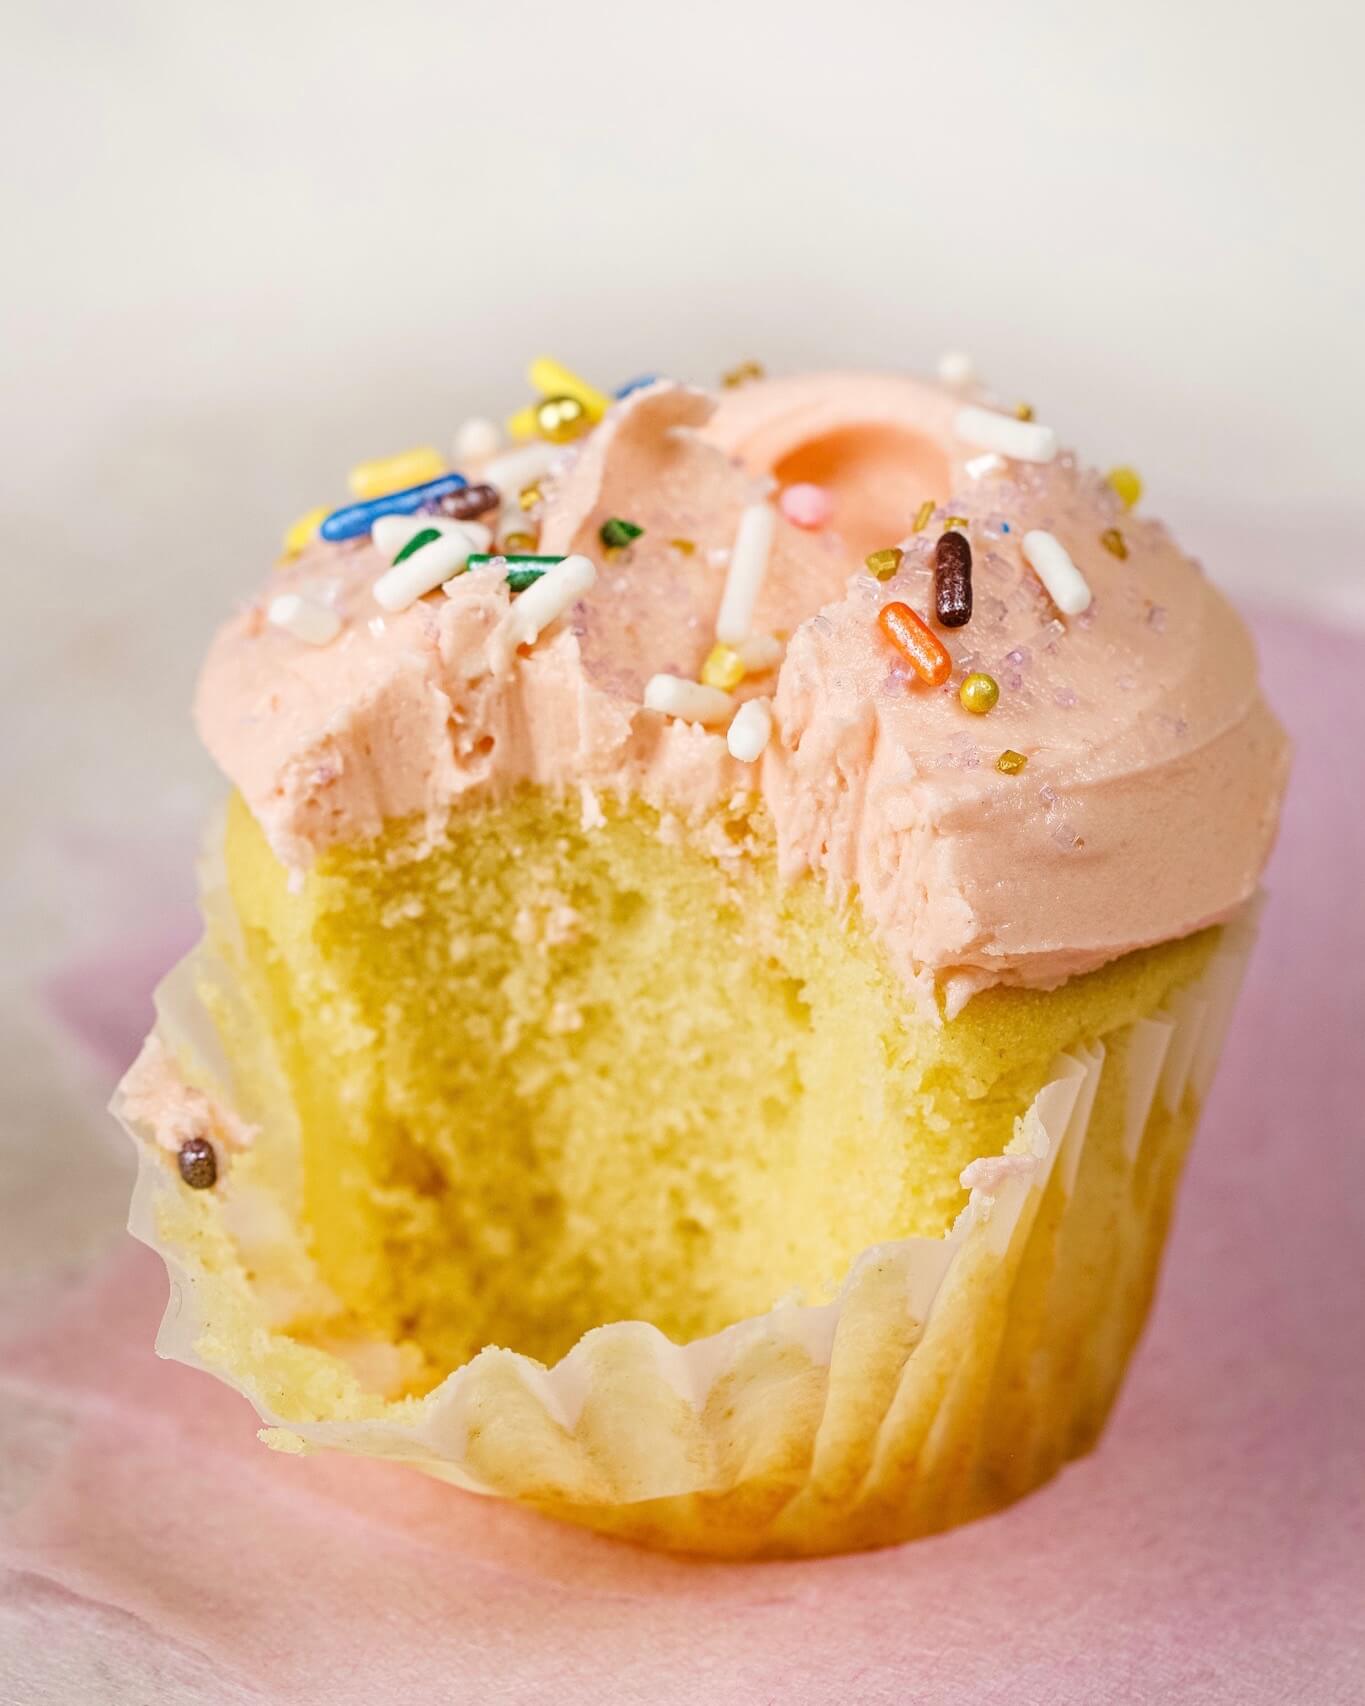 close up on vanilla cupcake with vanilla frosting. A bite has been taken out